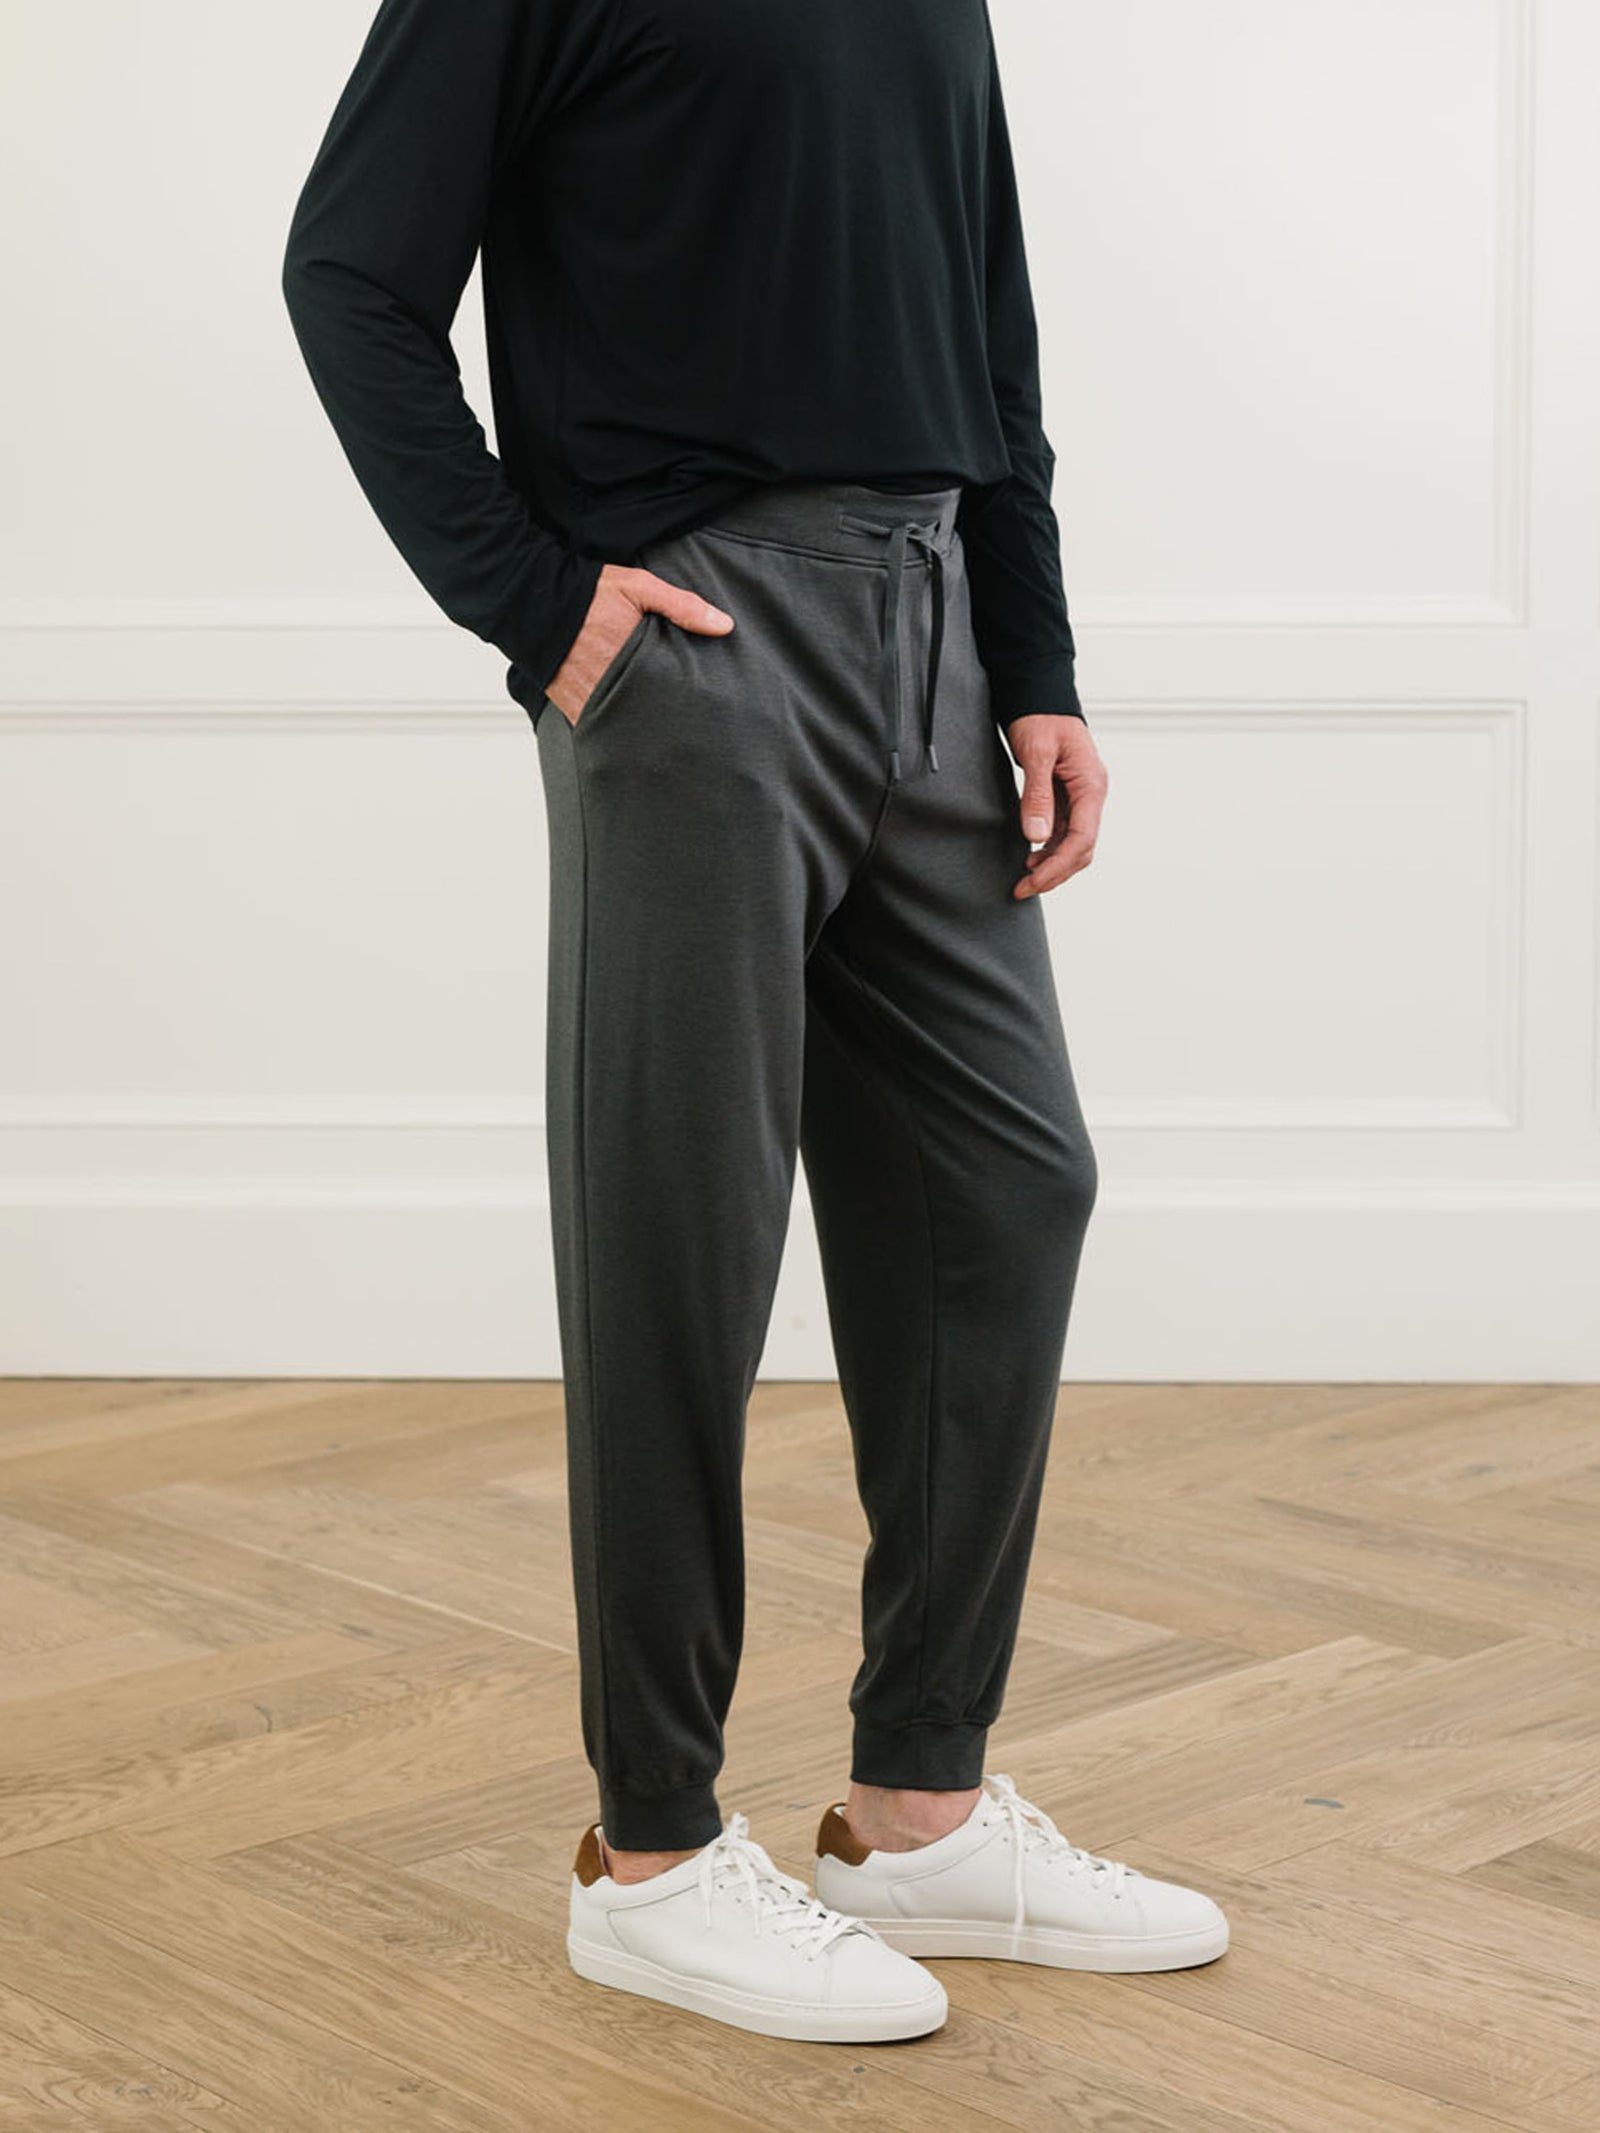 Black/Charcoal Men's Bamboo Jogger Set. There is a man wearing the jogger set. He is standing in a well lit room in a home.